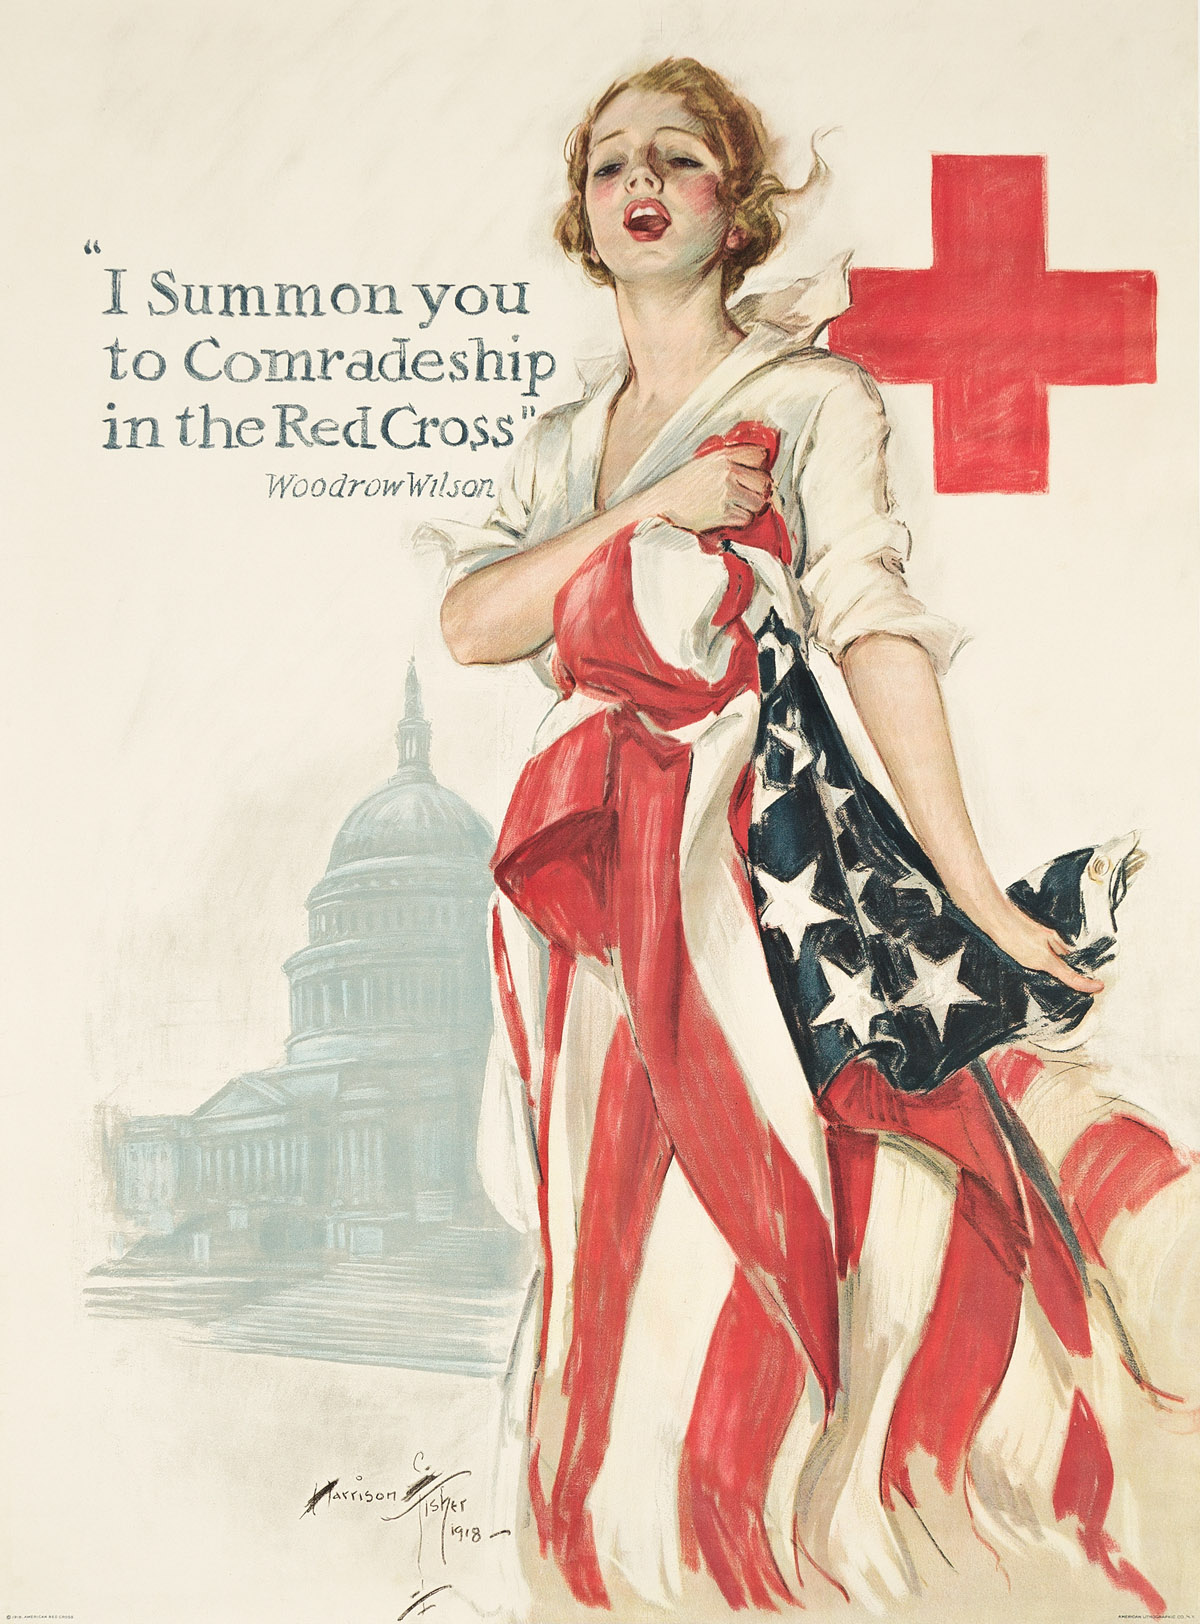 HARRISON FISHER (1875-1934).  I SUMMON YOU TO COMRADESHIP IN THE RED CROSS. 1918. 40x29½ inches, 101½x75 cm. American Lithographic Co